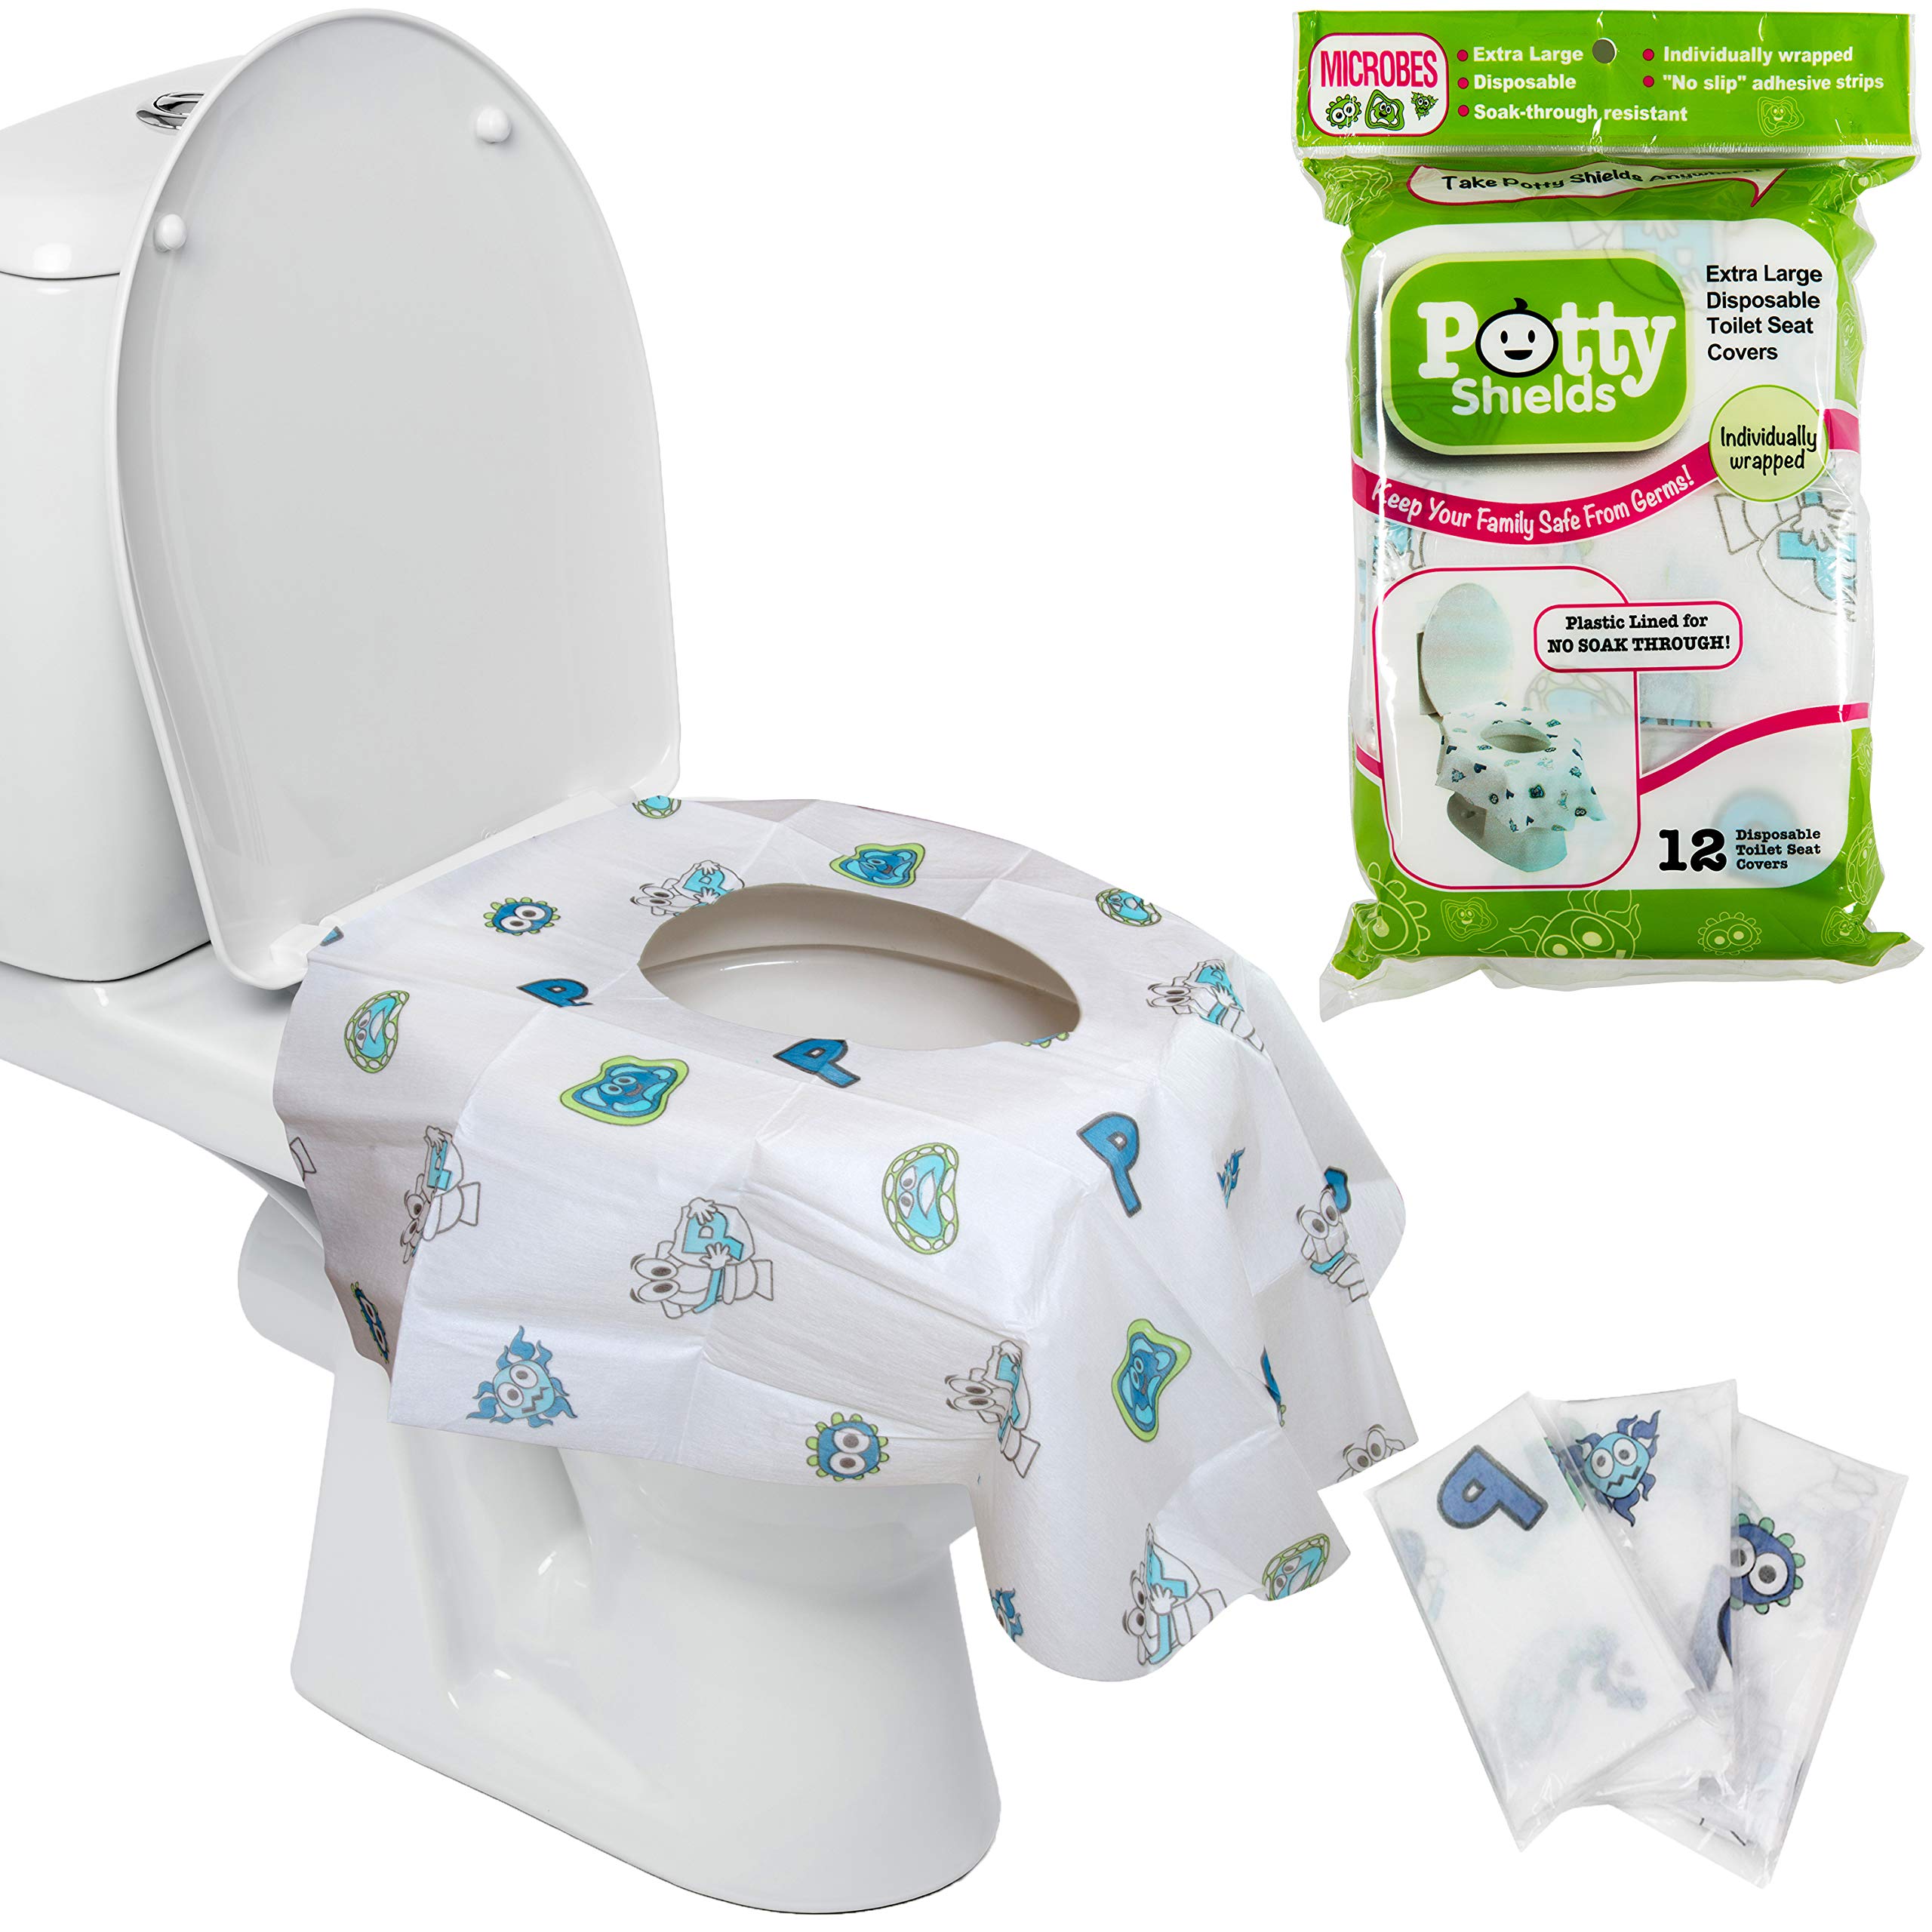 Disposable Toilet Seat Covers for Kids & Adults (12 Pack) - Germ